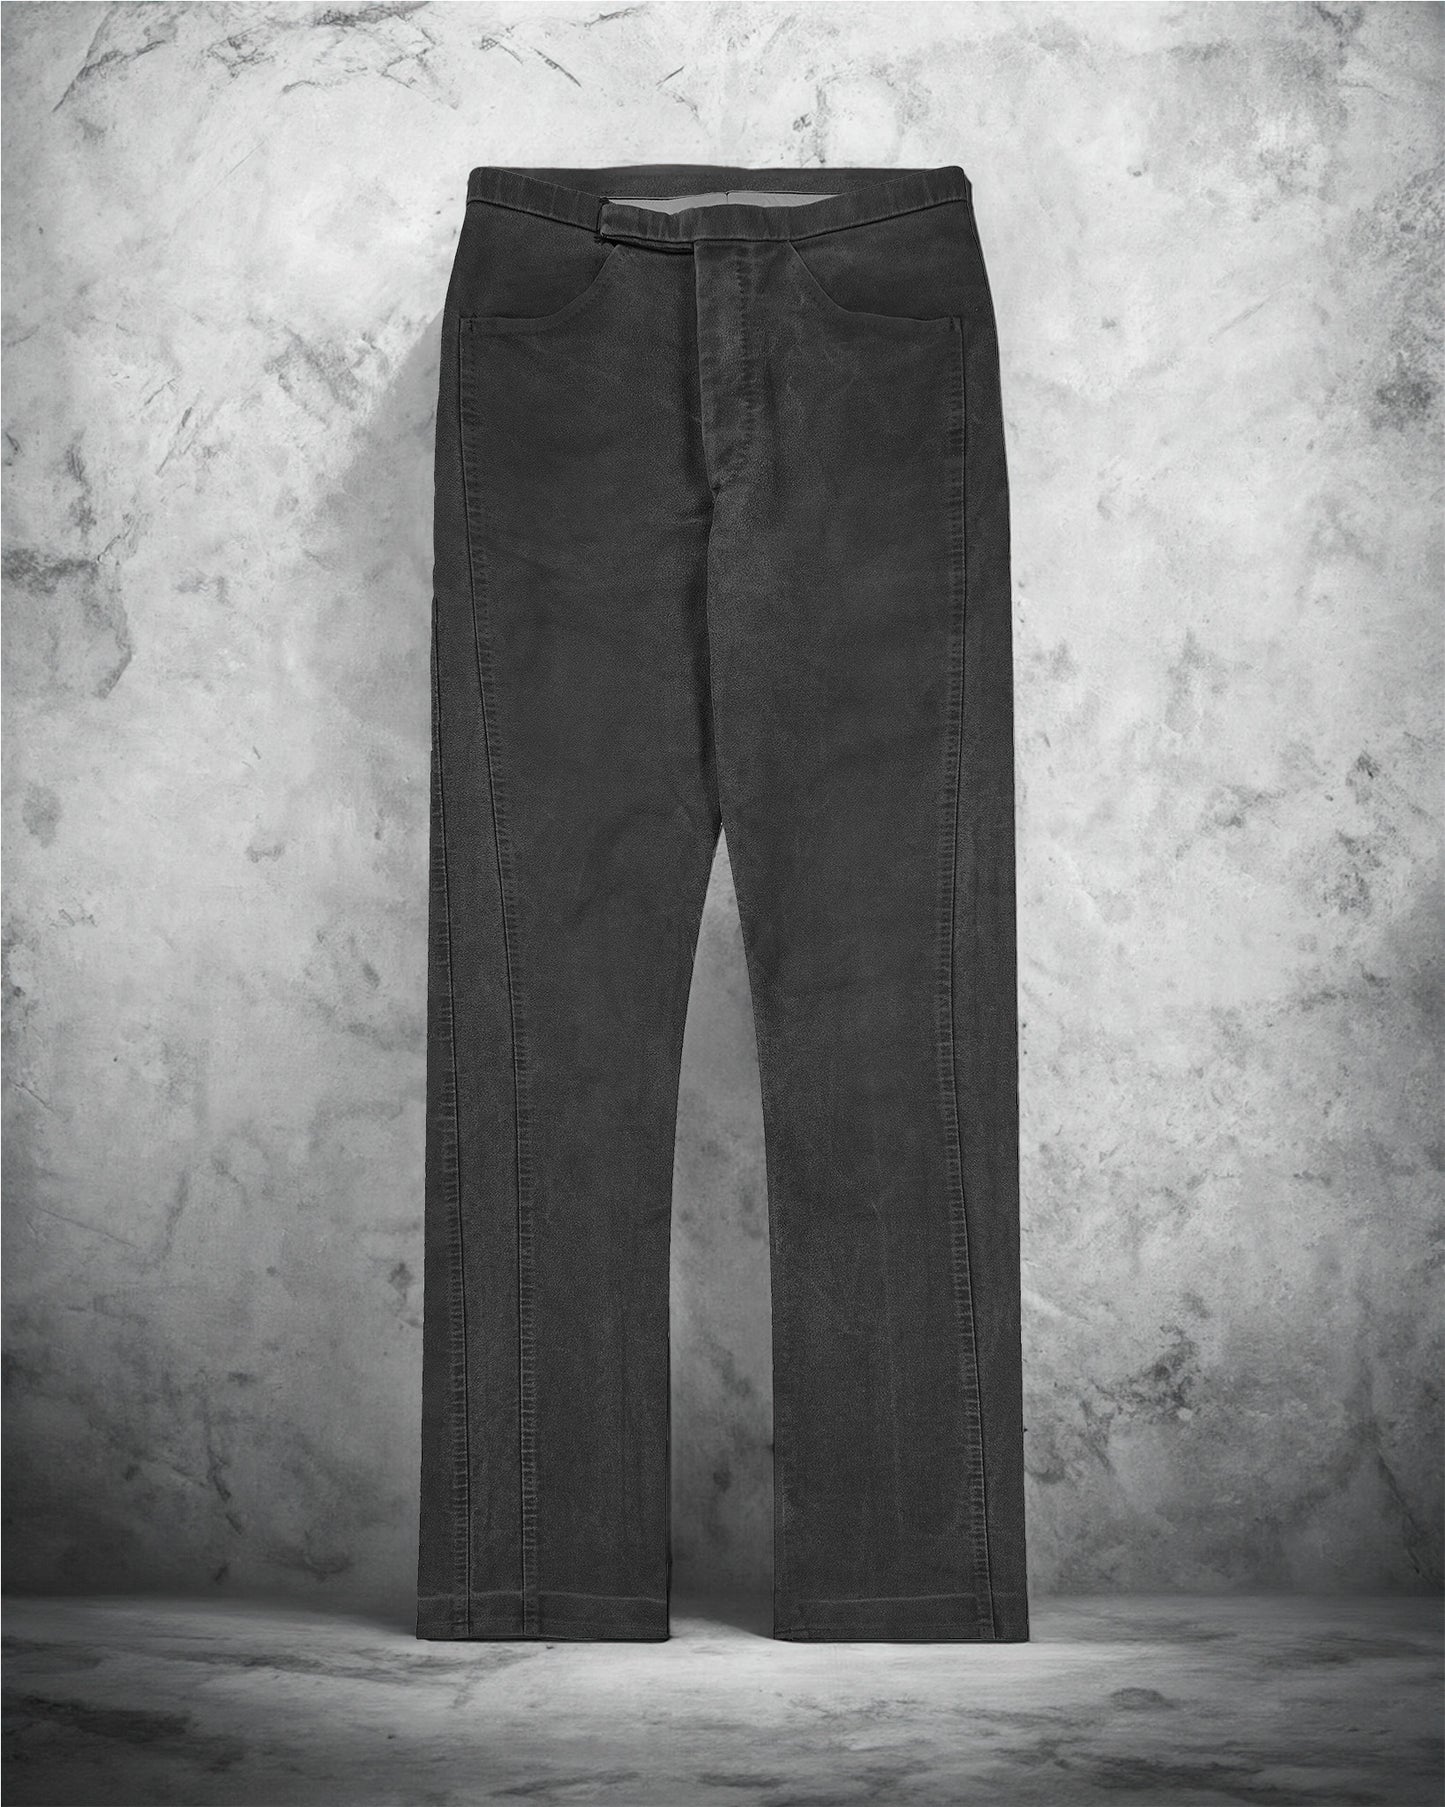 Carol Christian Poell Moleskin Double Seam Trousers - AW99 "Form-Material-Color"